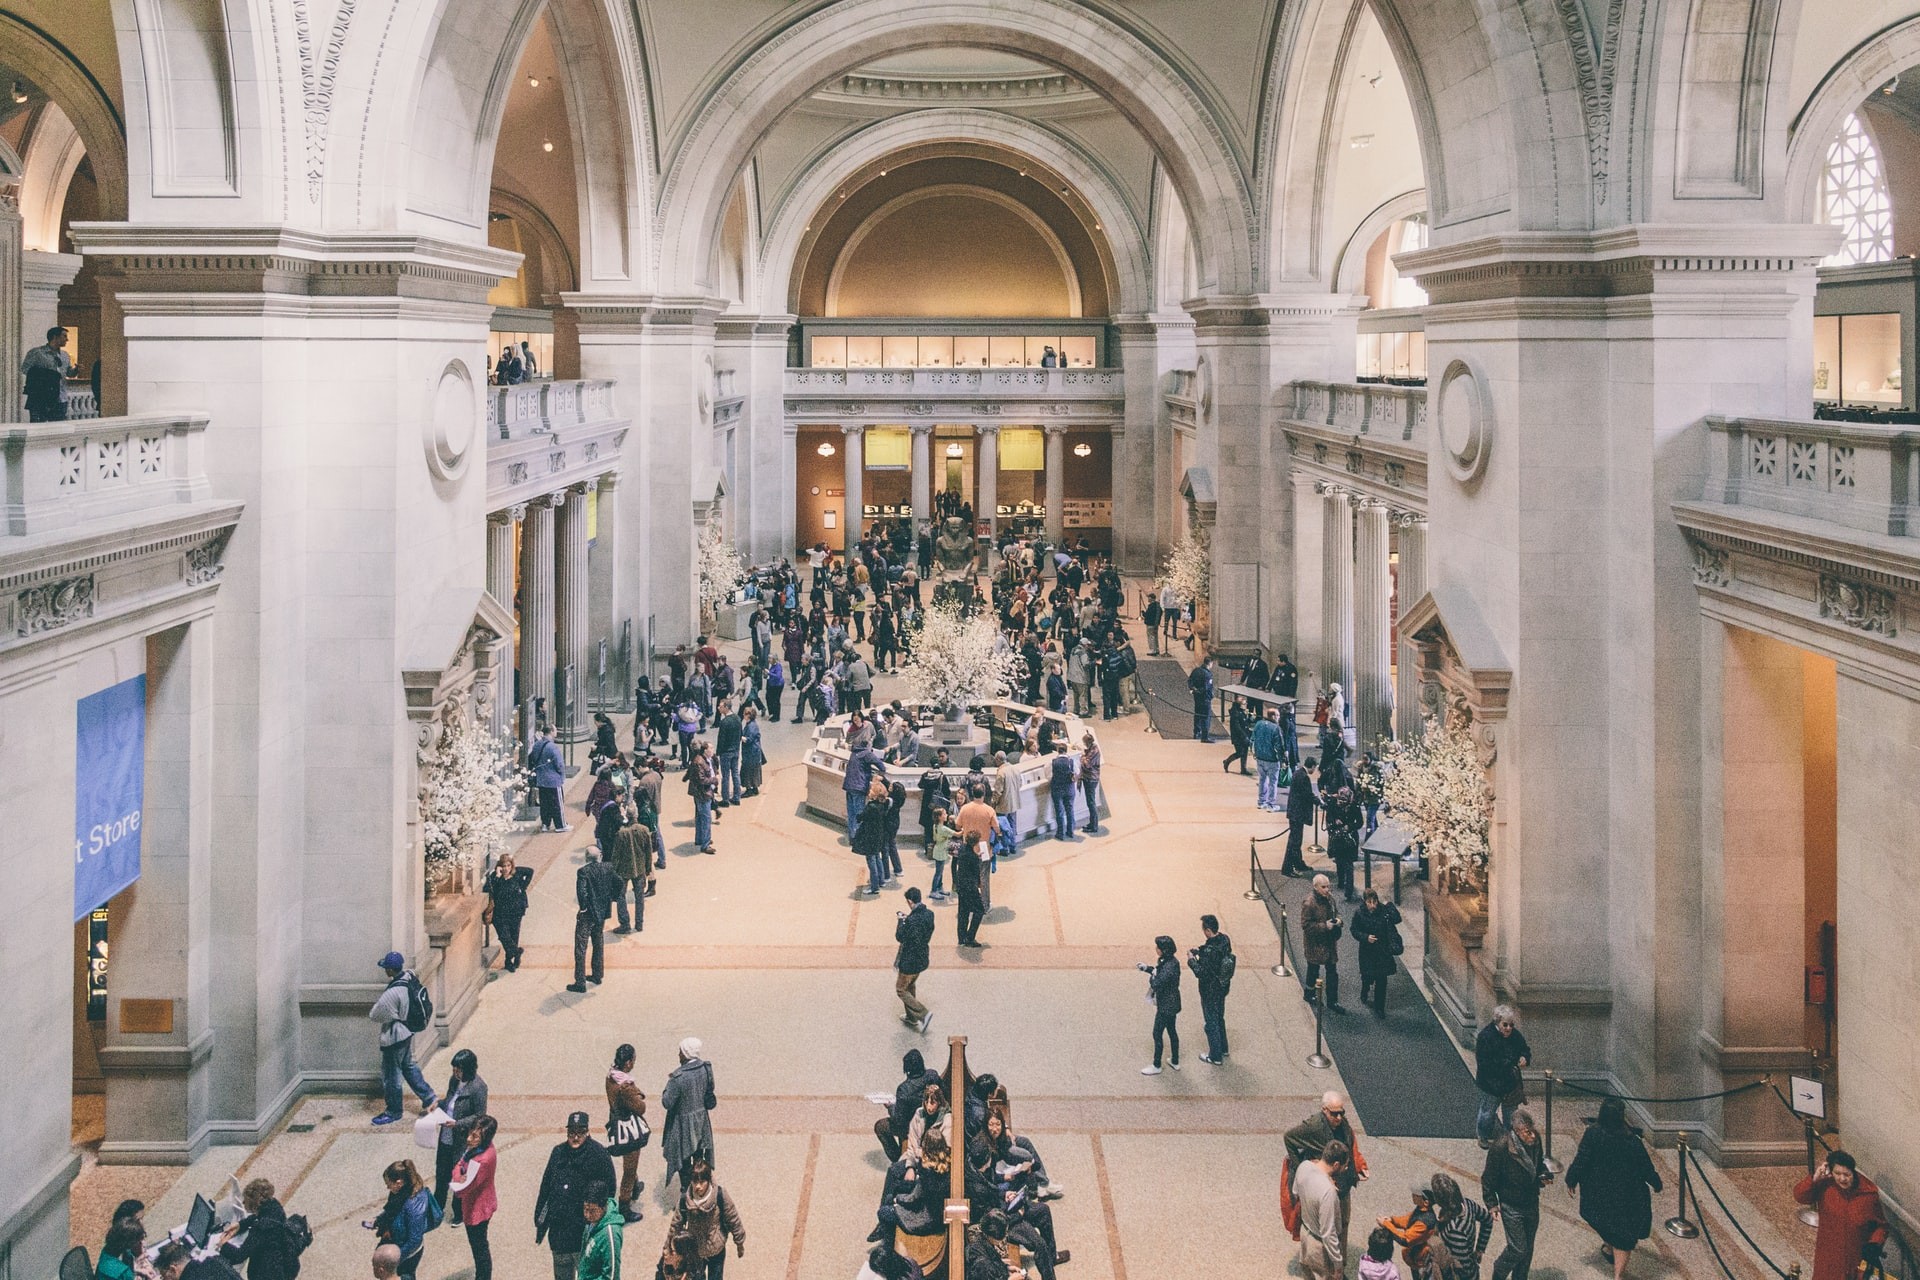 The Great Hall in the Metropolitan Museum of Art in New York City